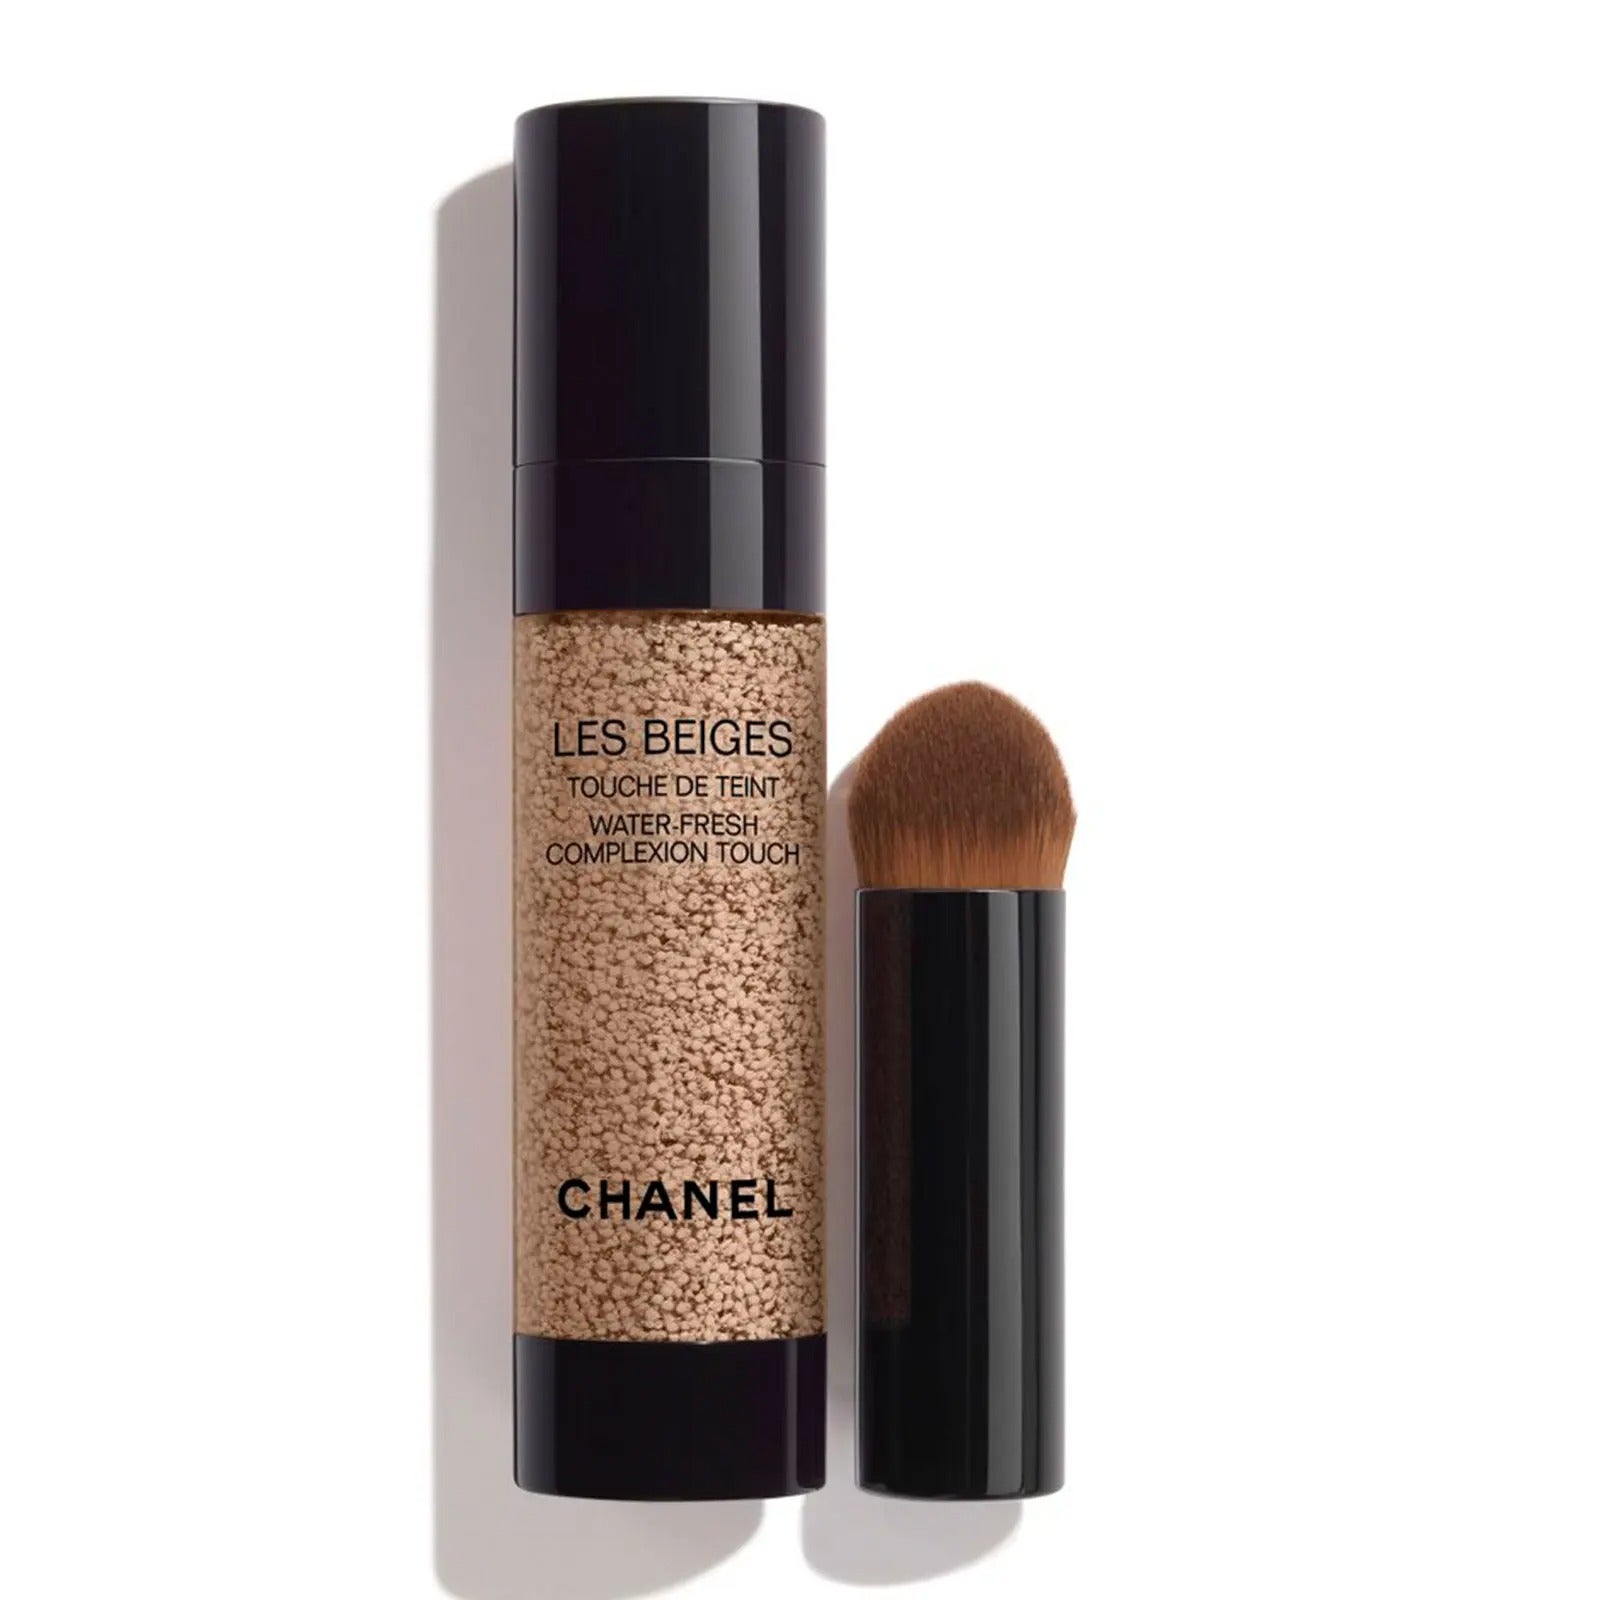 CHANEL Les Beiges Water-fresh Complexion Touch